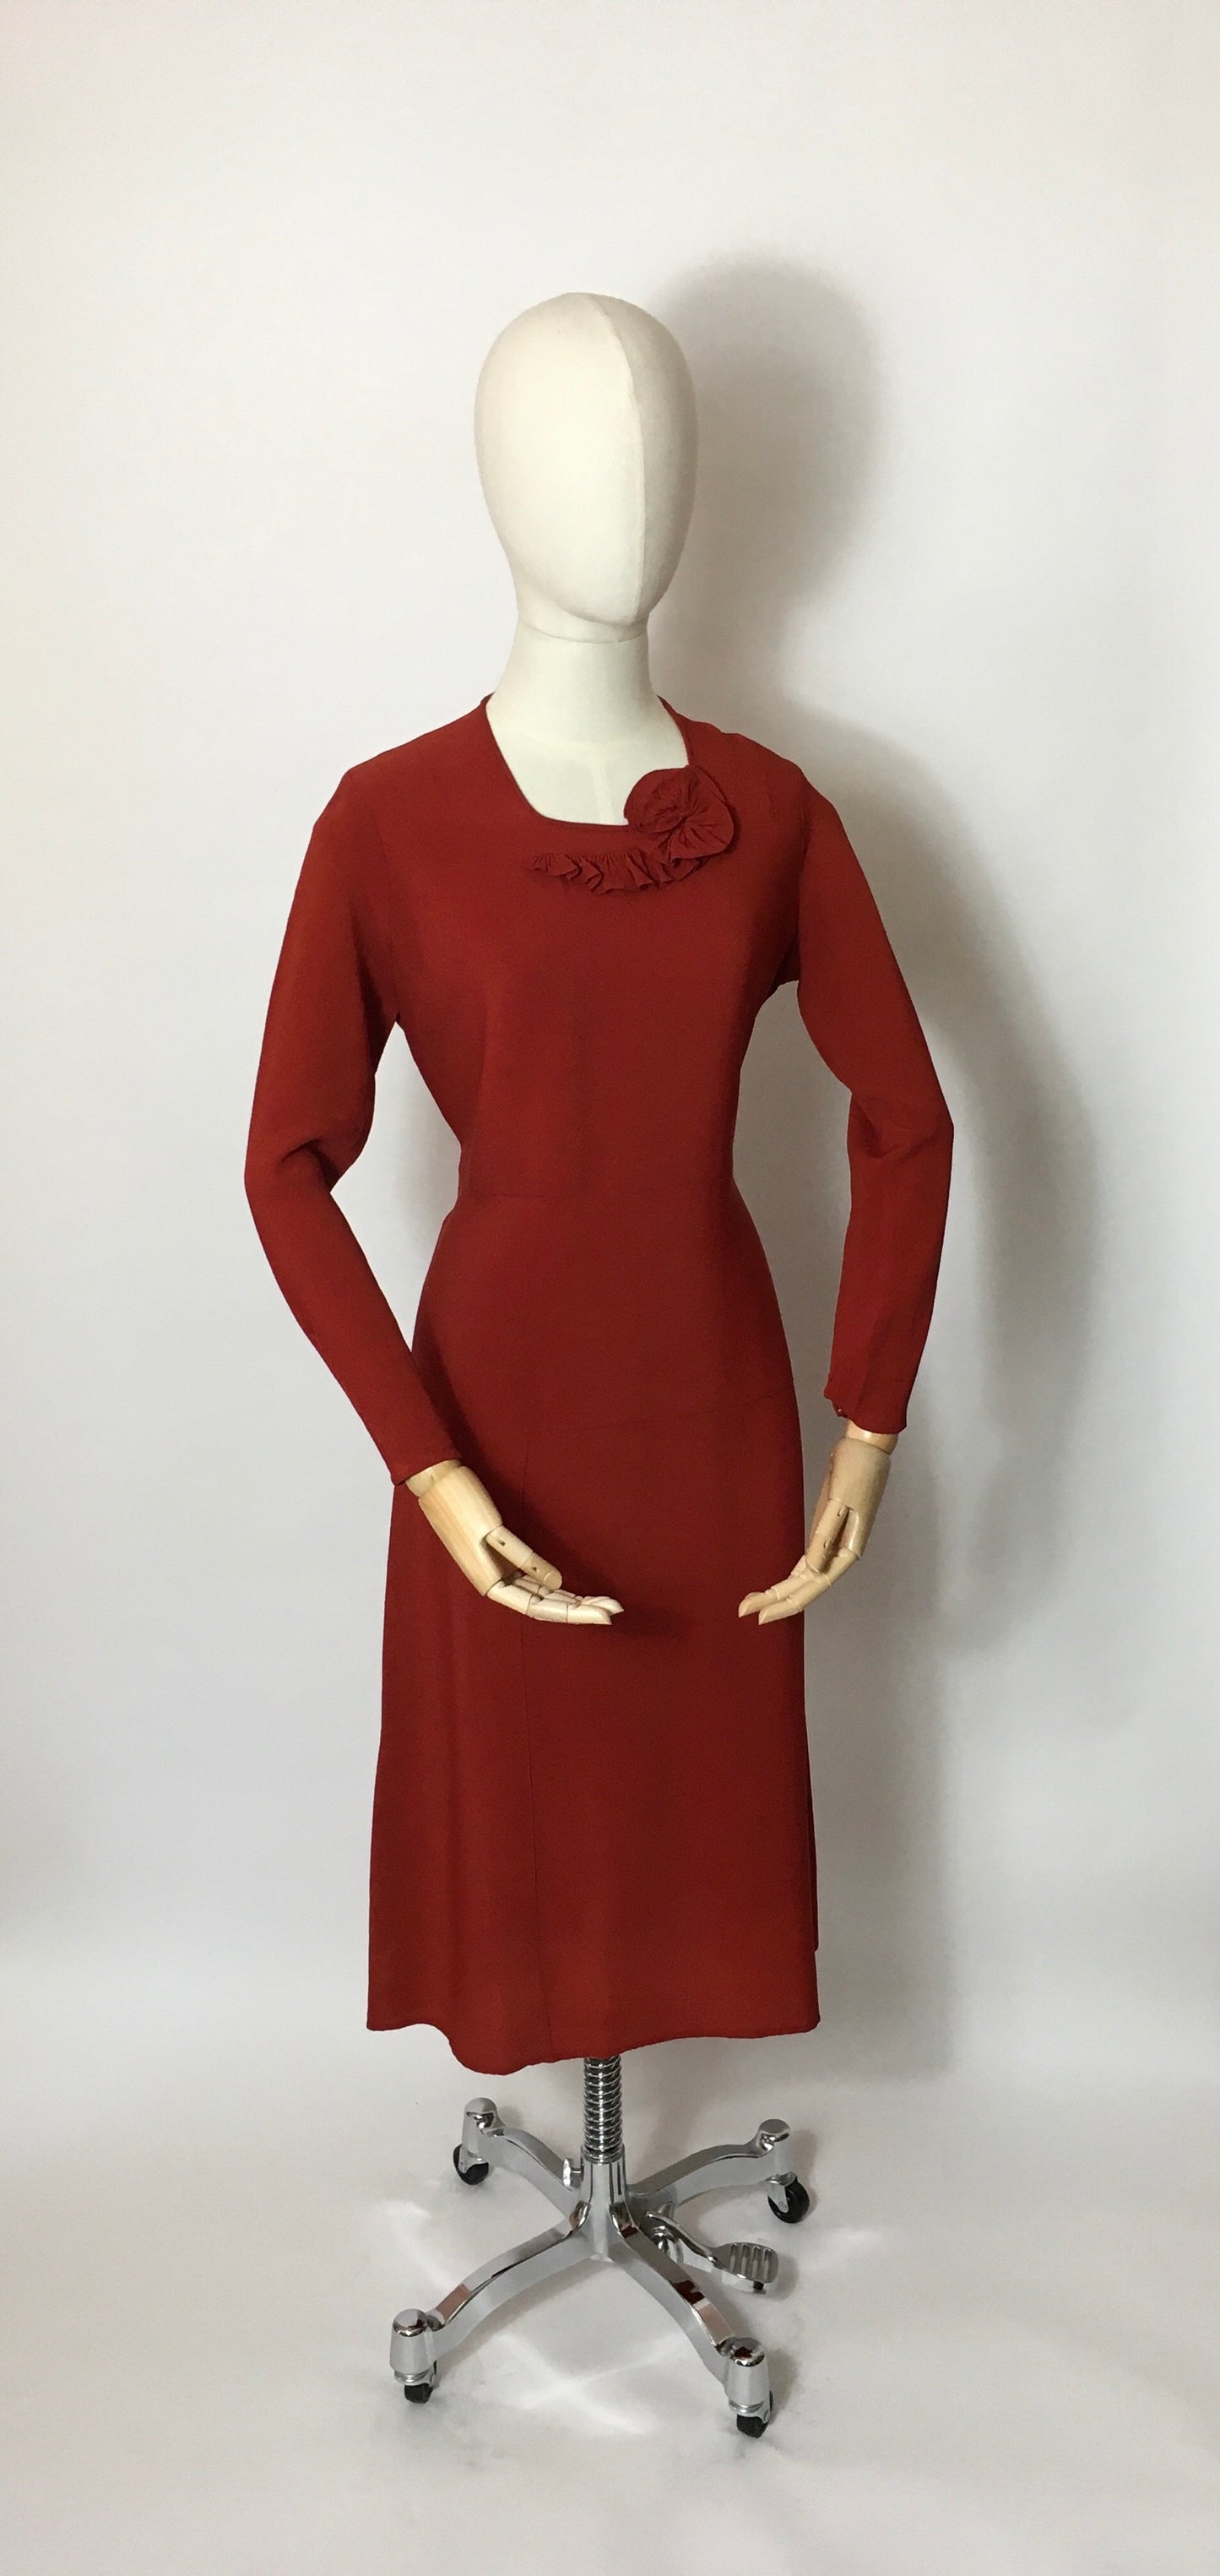 Original 1930’s Day Dress In A Beautiful Rust Crepe - Festival of Vintage Fashion Show Exclusive